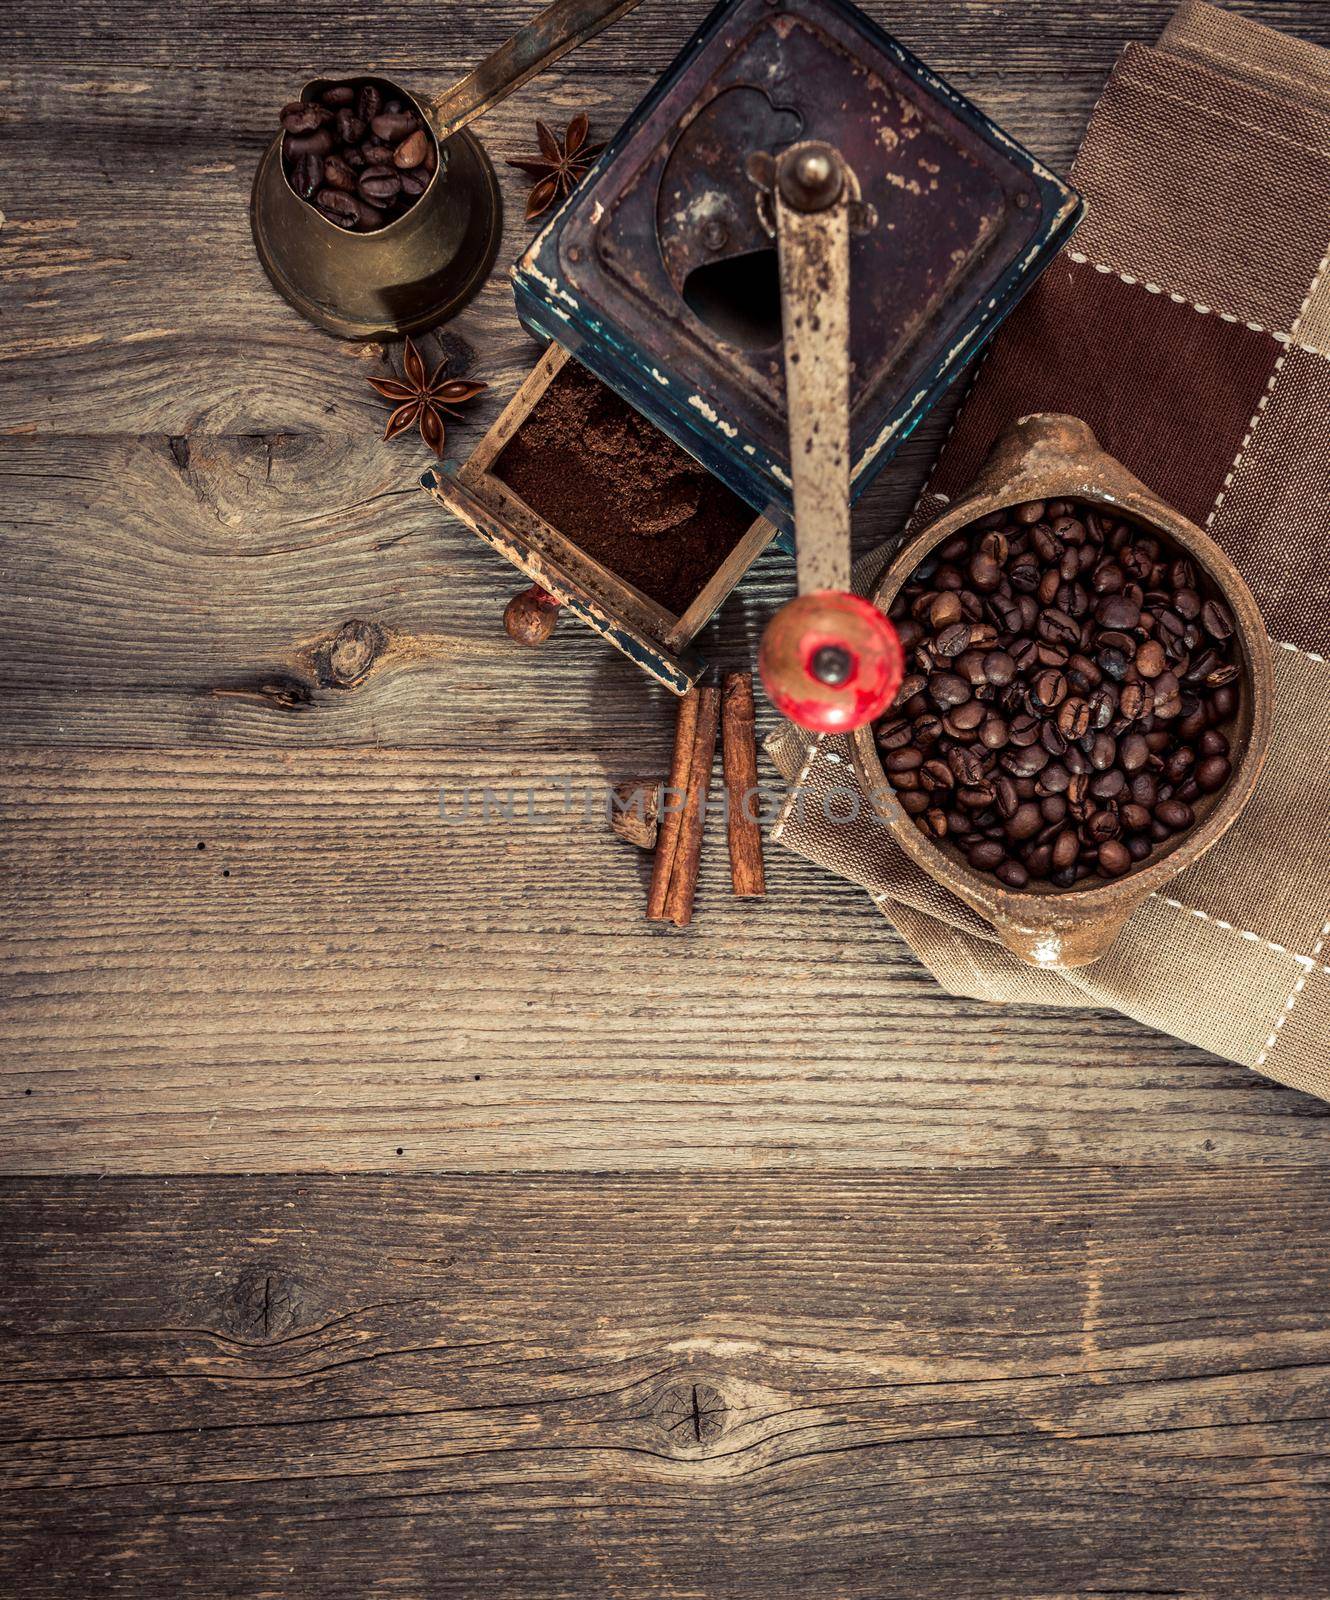 old grinder and coffee beans by tan4ikk1